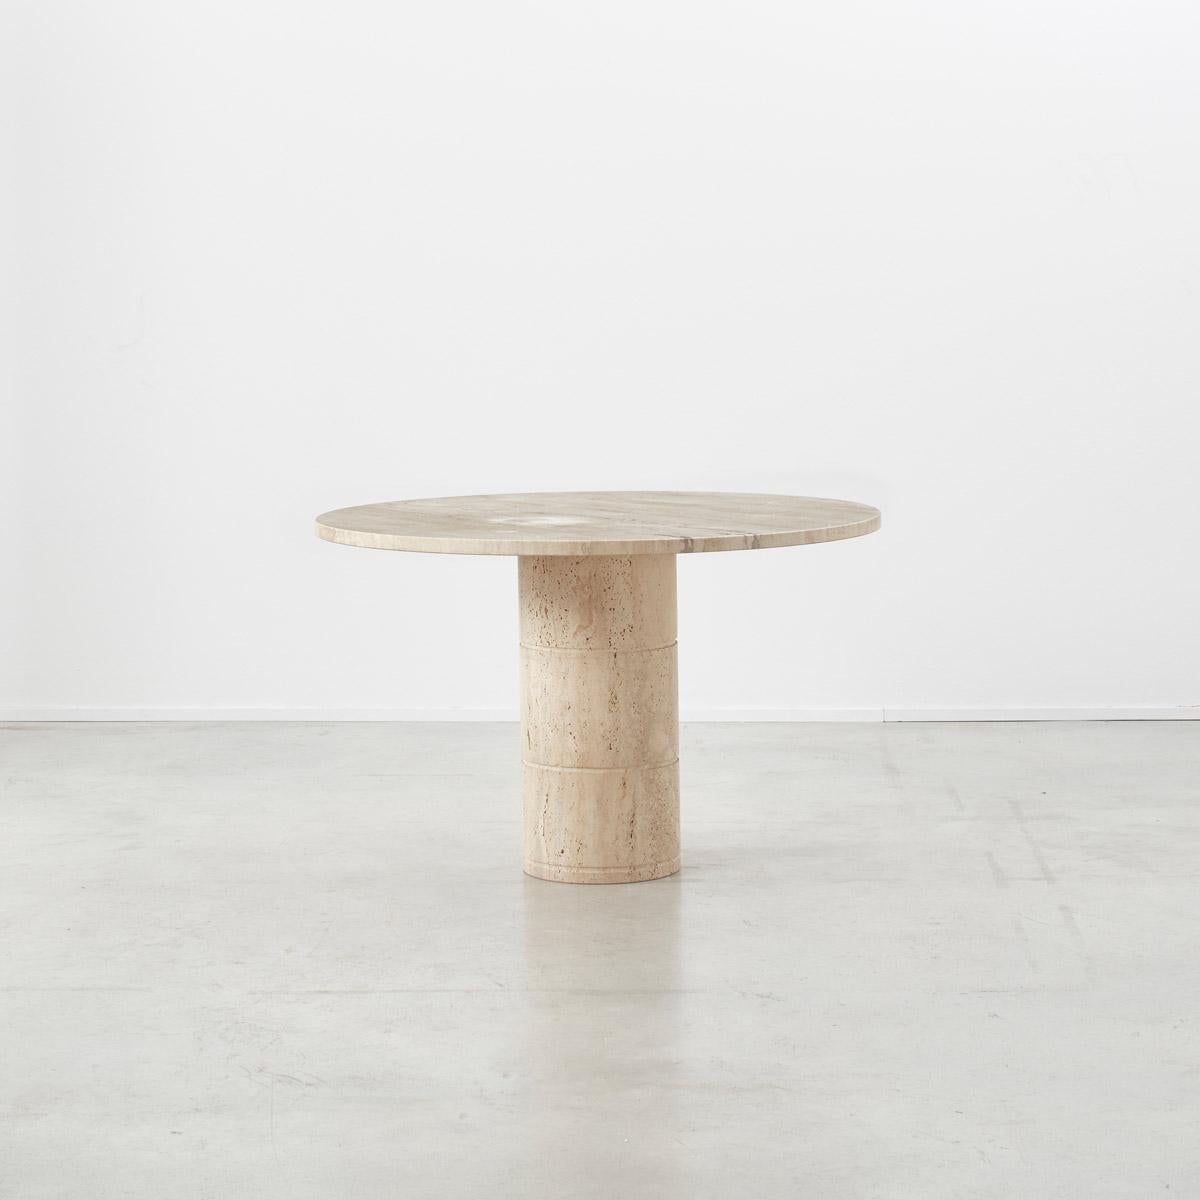 Italian Up&Up Travertine Dining Table Up&Up, Italy, circa 1970